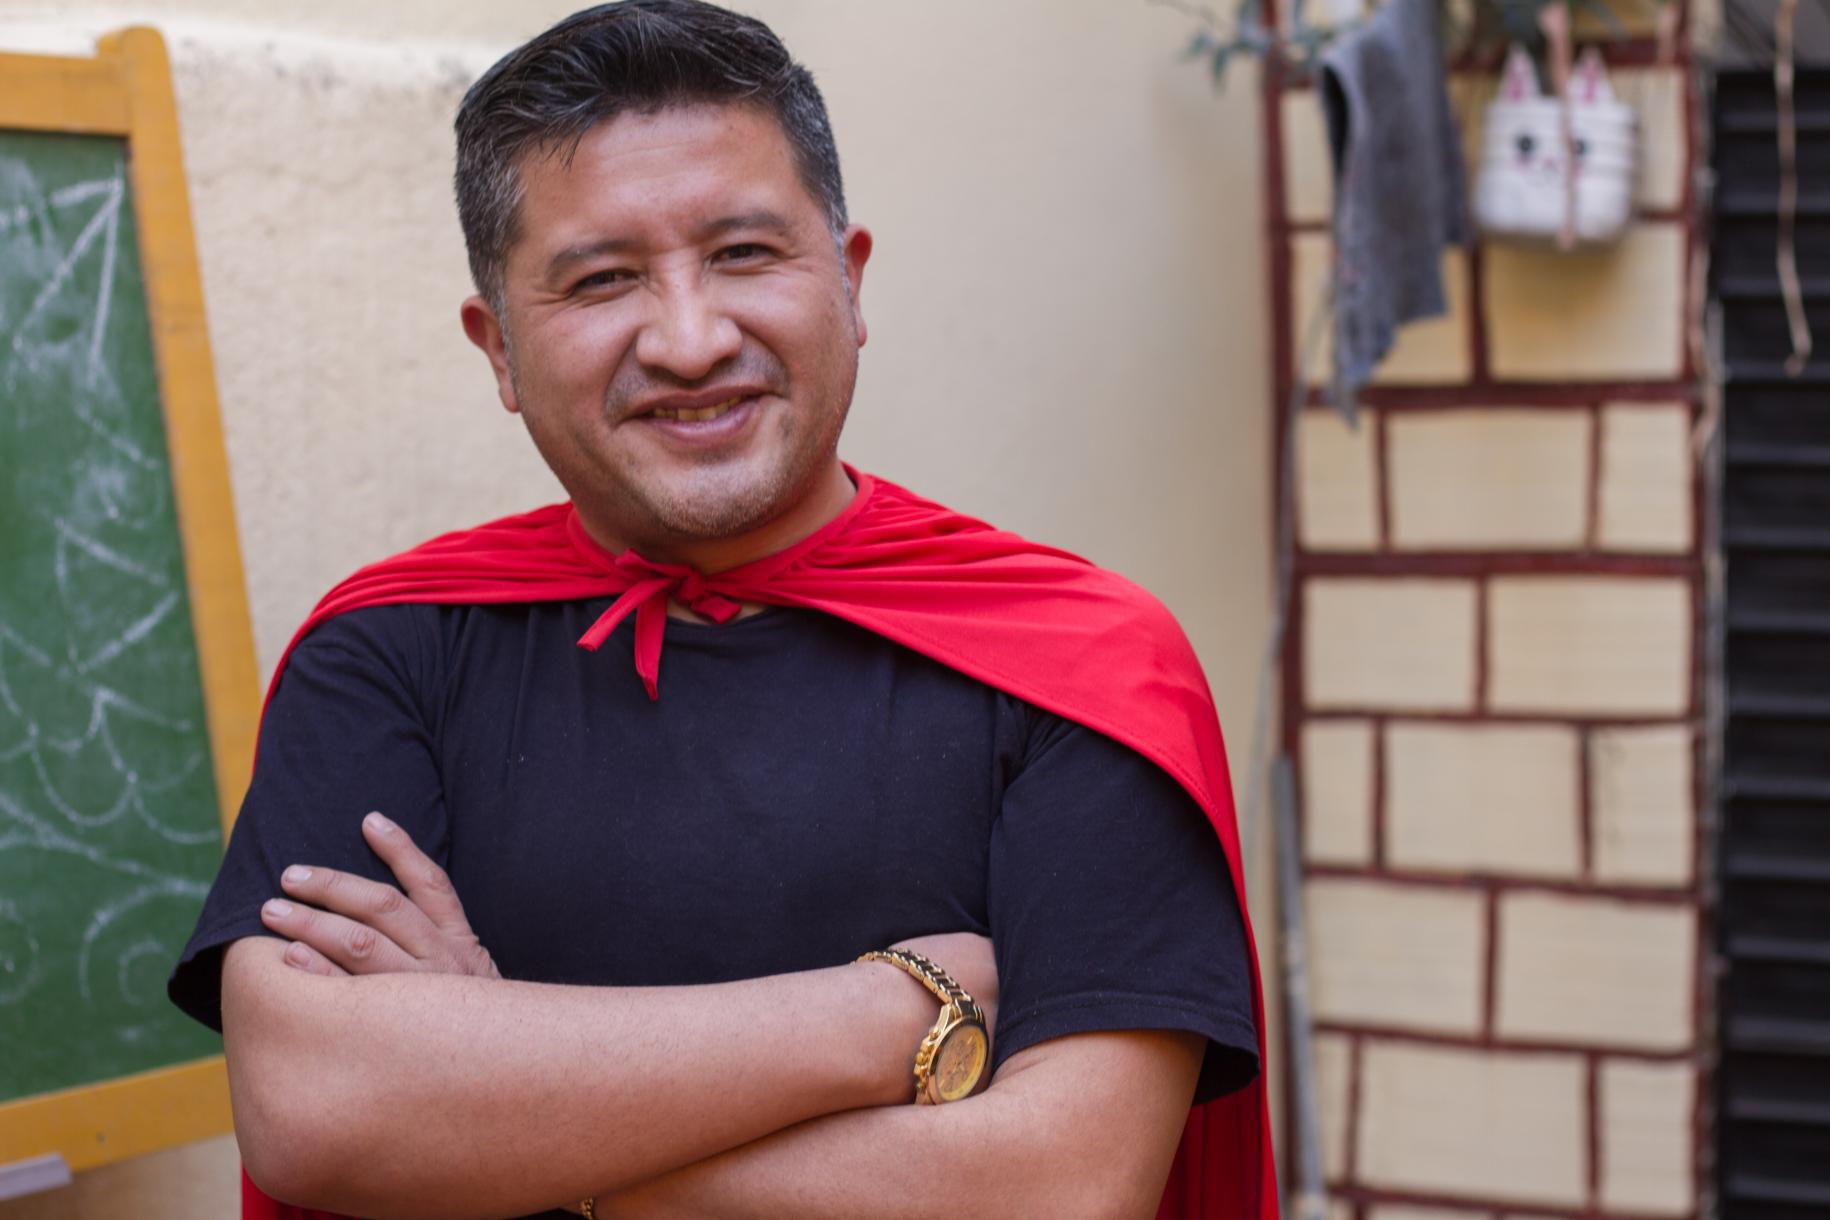 A man stands smiling in front of a blackboard, with notes made with white chalk, and wears a red superhero cape.